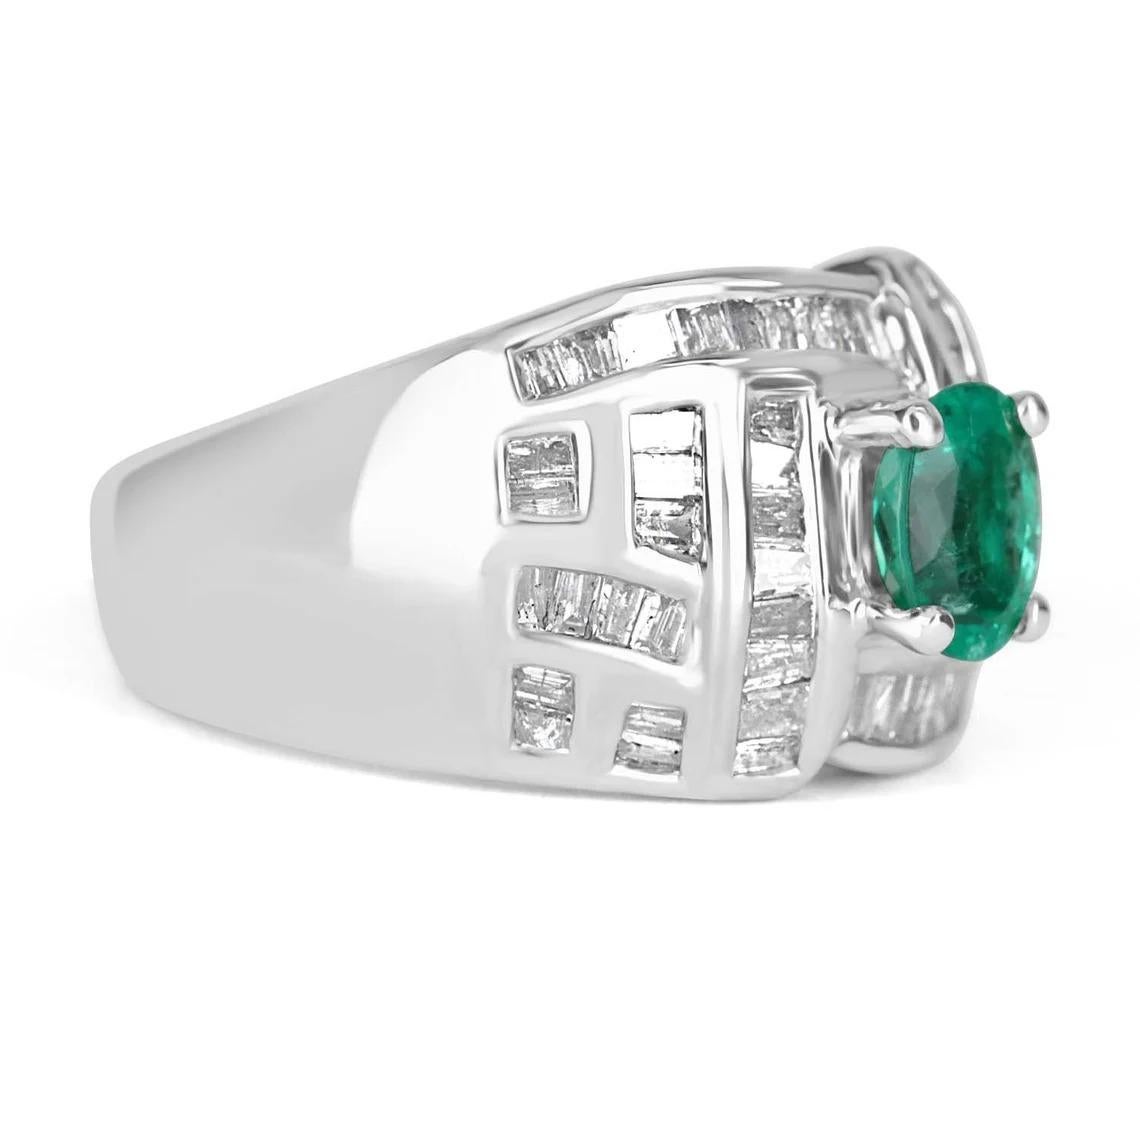 A one-of-a-kind, oval emerald and diamond statement cluster ring. The center stone features a stunning AAA-quality oval cut emerald. Showcasing a vivacious, desirable green color with excellent luster. Surrounding this gorgeous stone are petite,